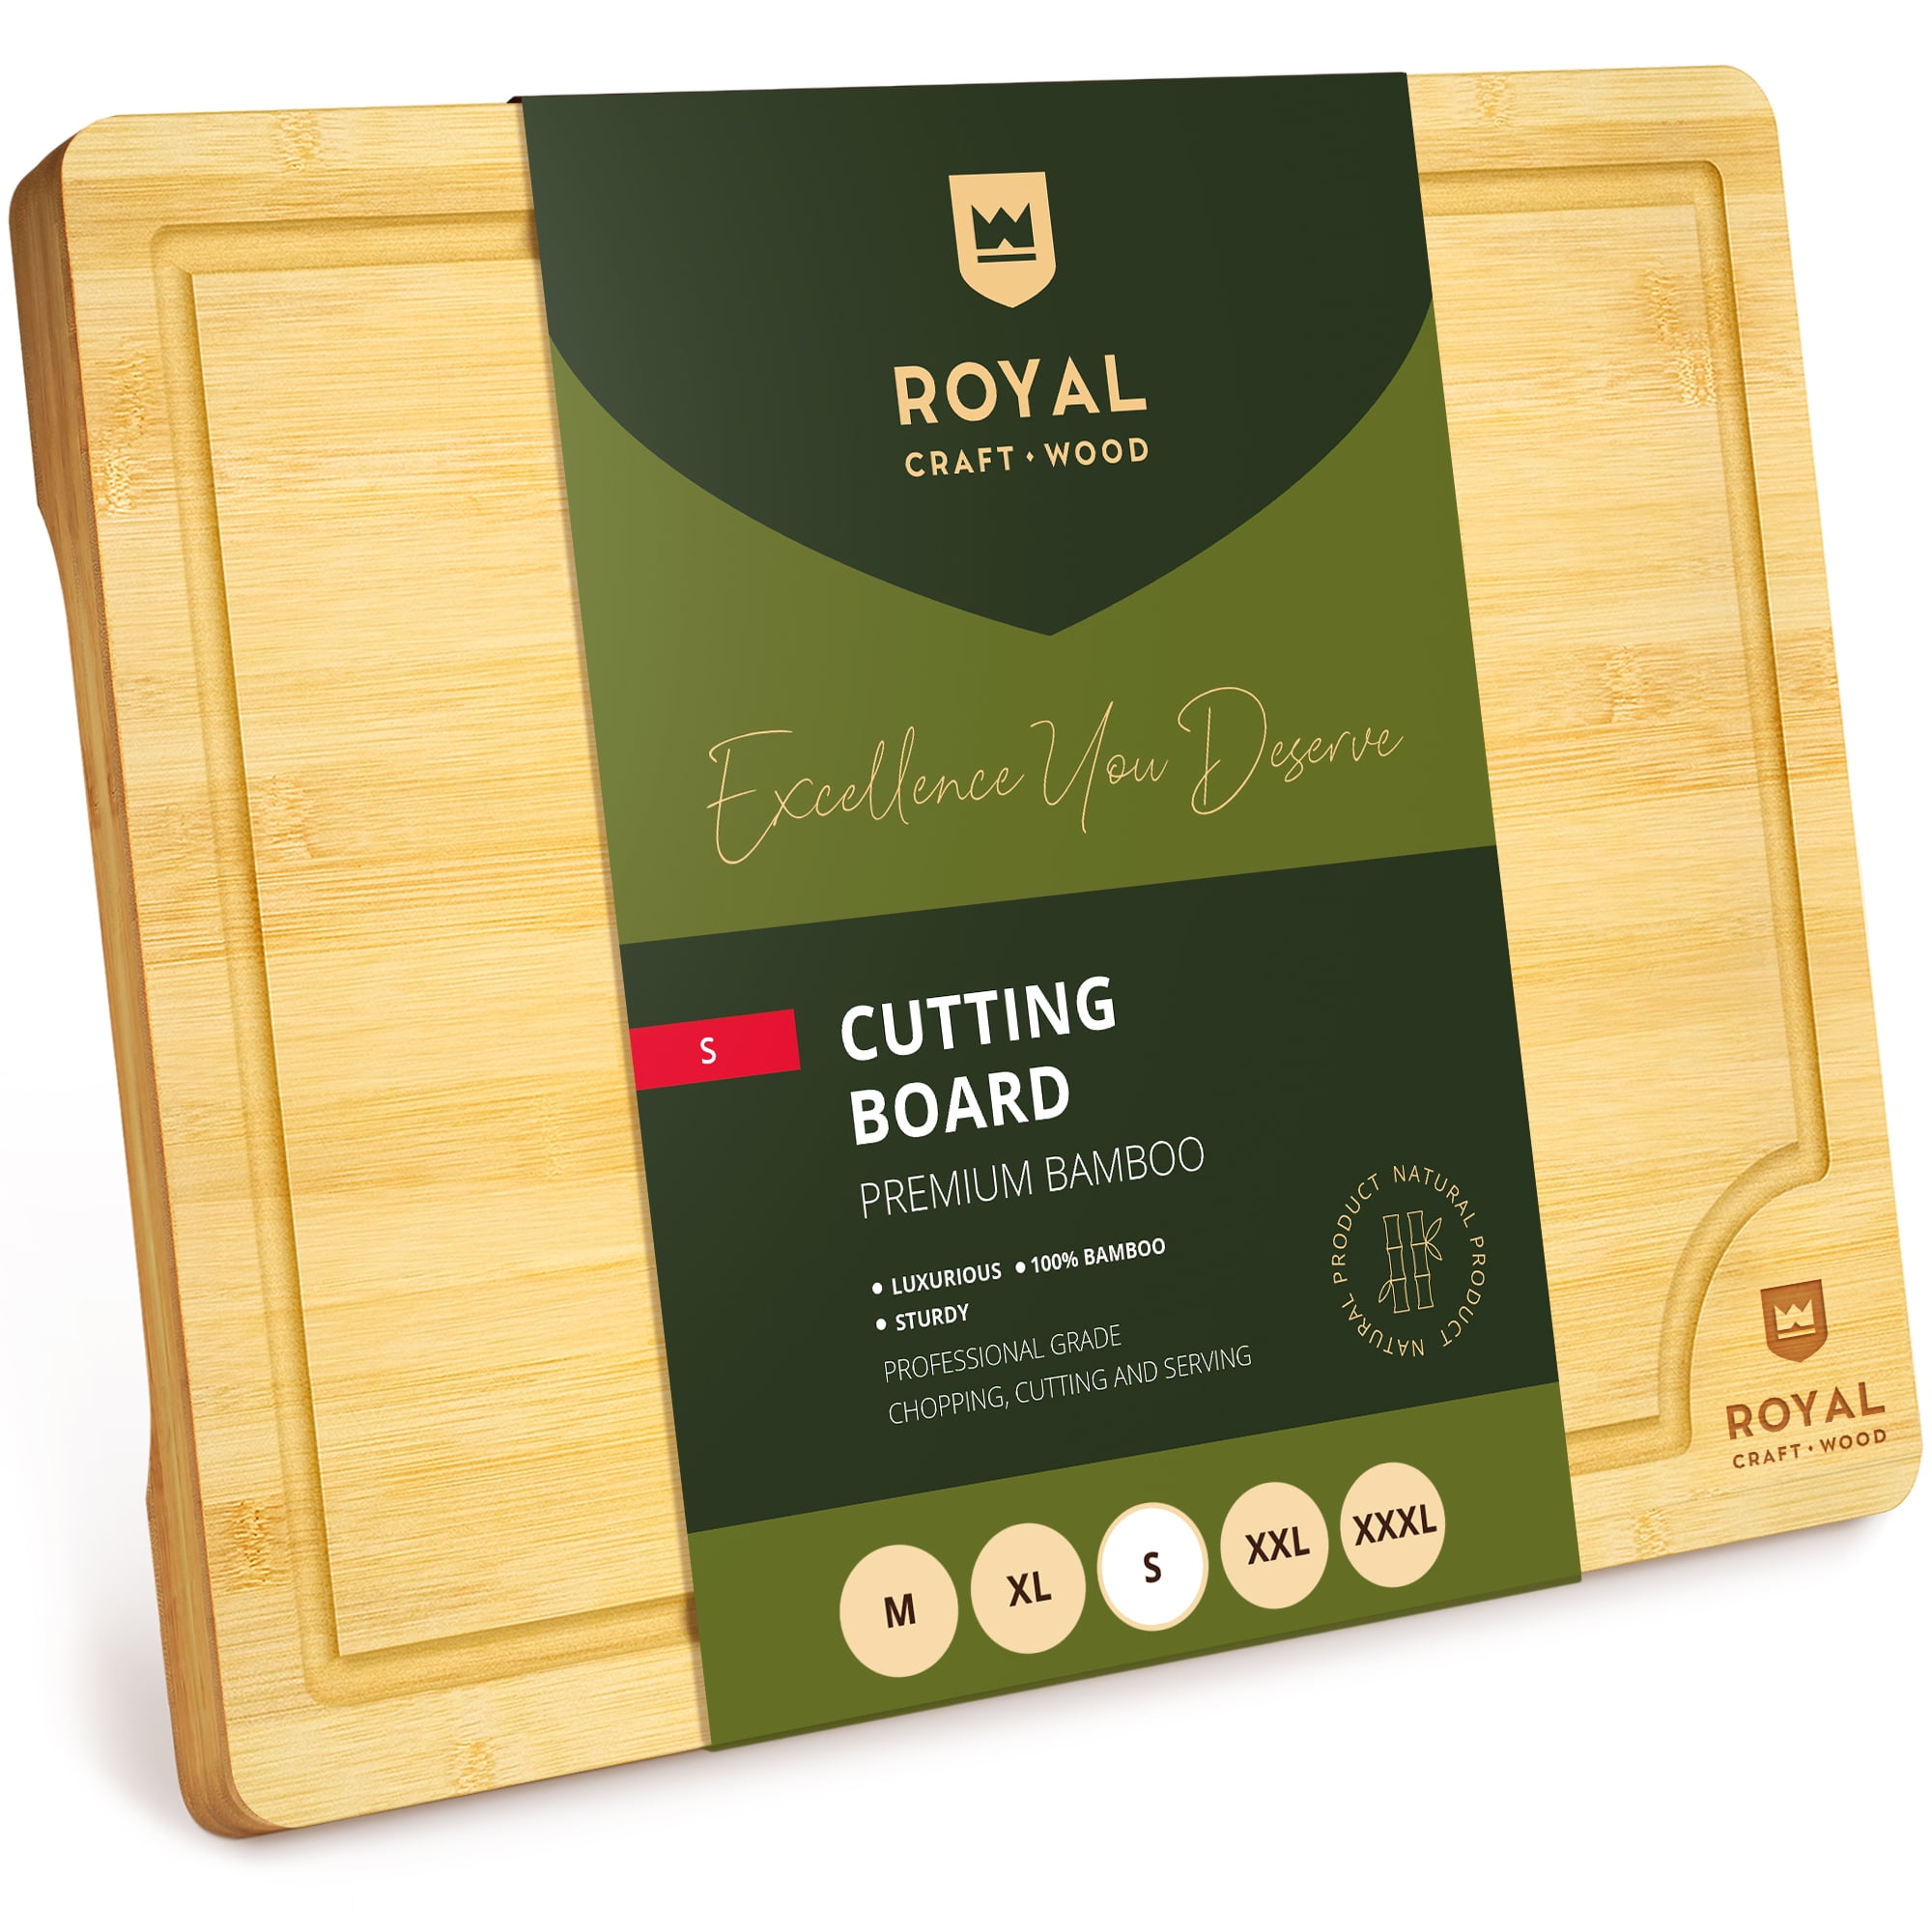 Crandek Corner Counter Cutting Board for Kitchen - Bamboo Wooden Chopping Block with Juice Groove - Fits Inner Corner of Countertops - Solid Natural